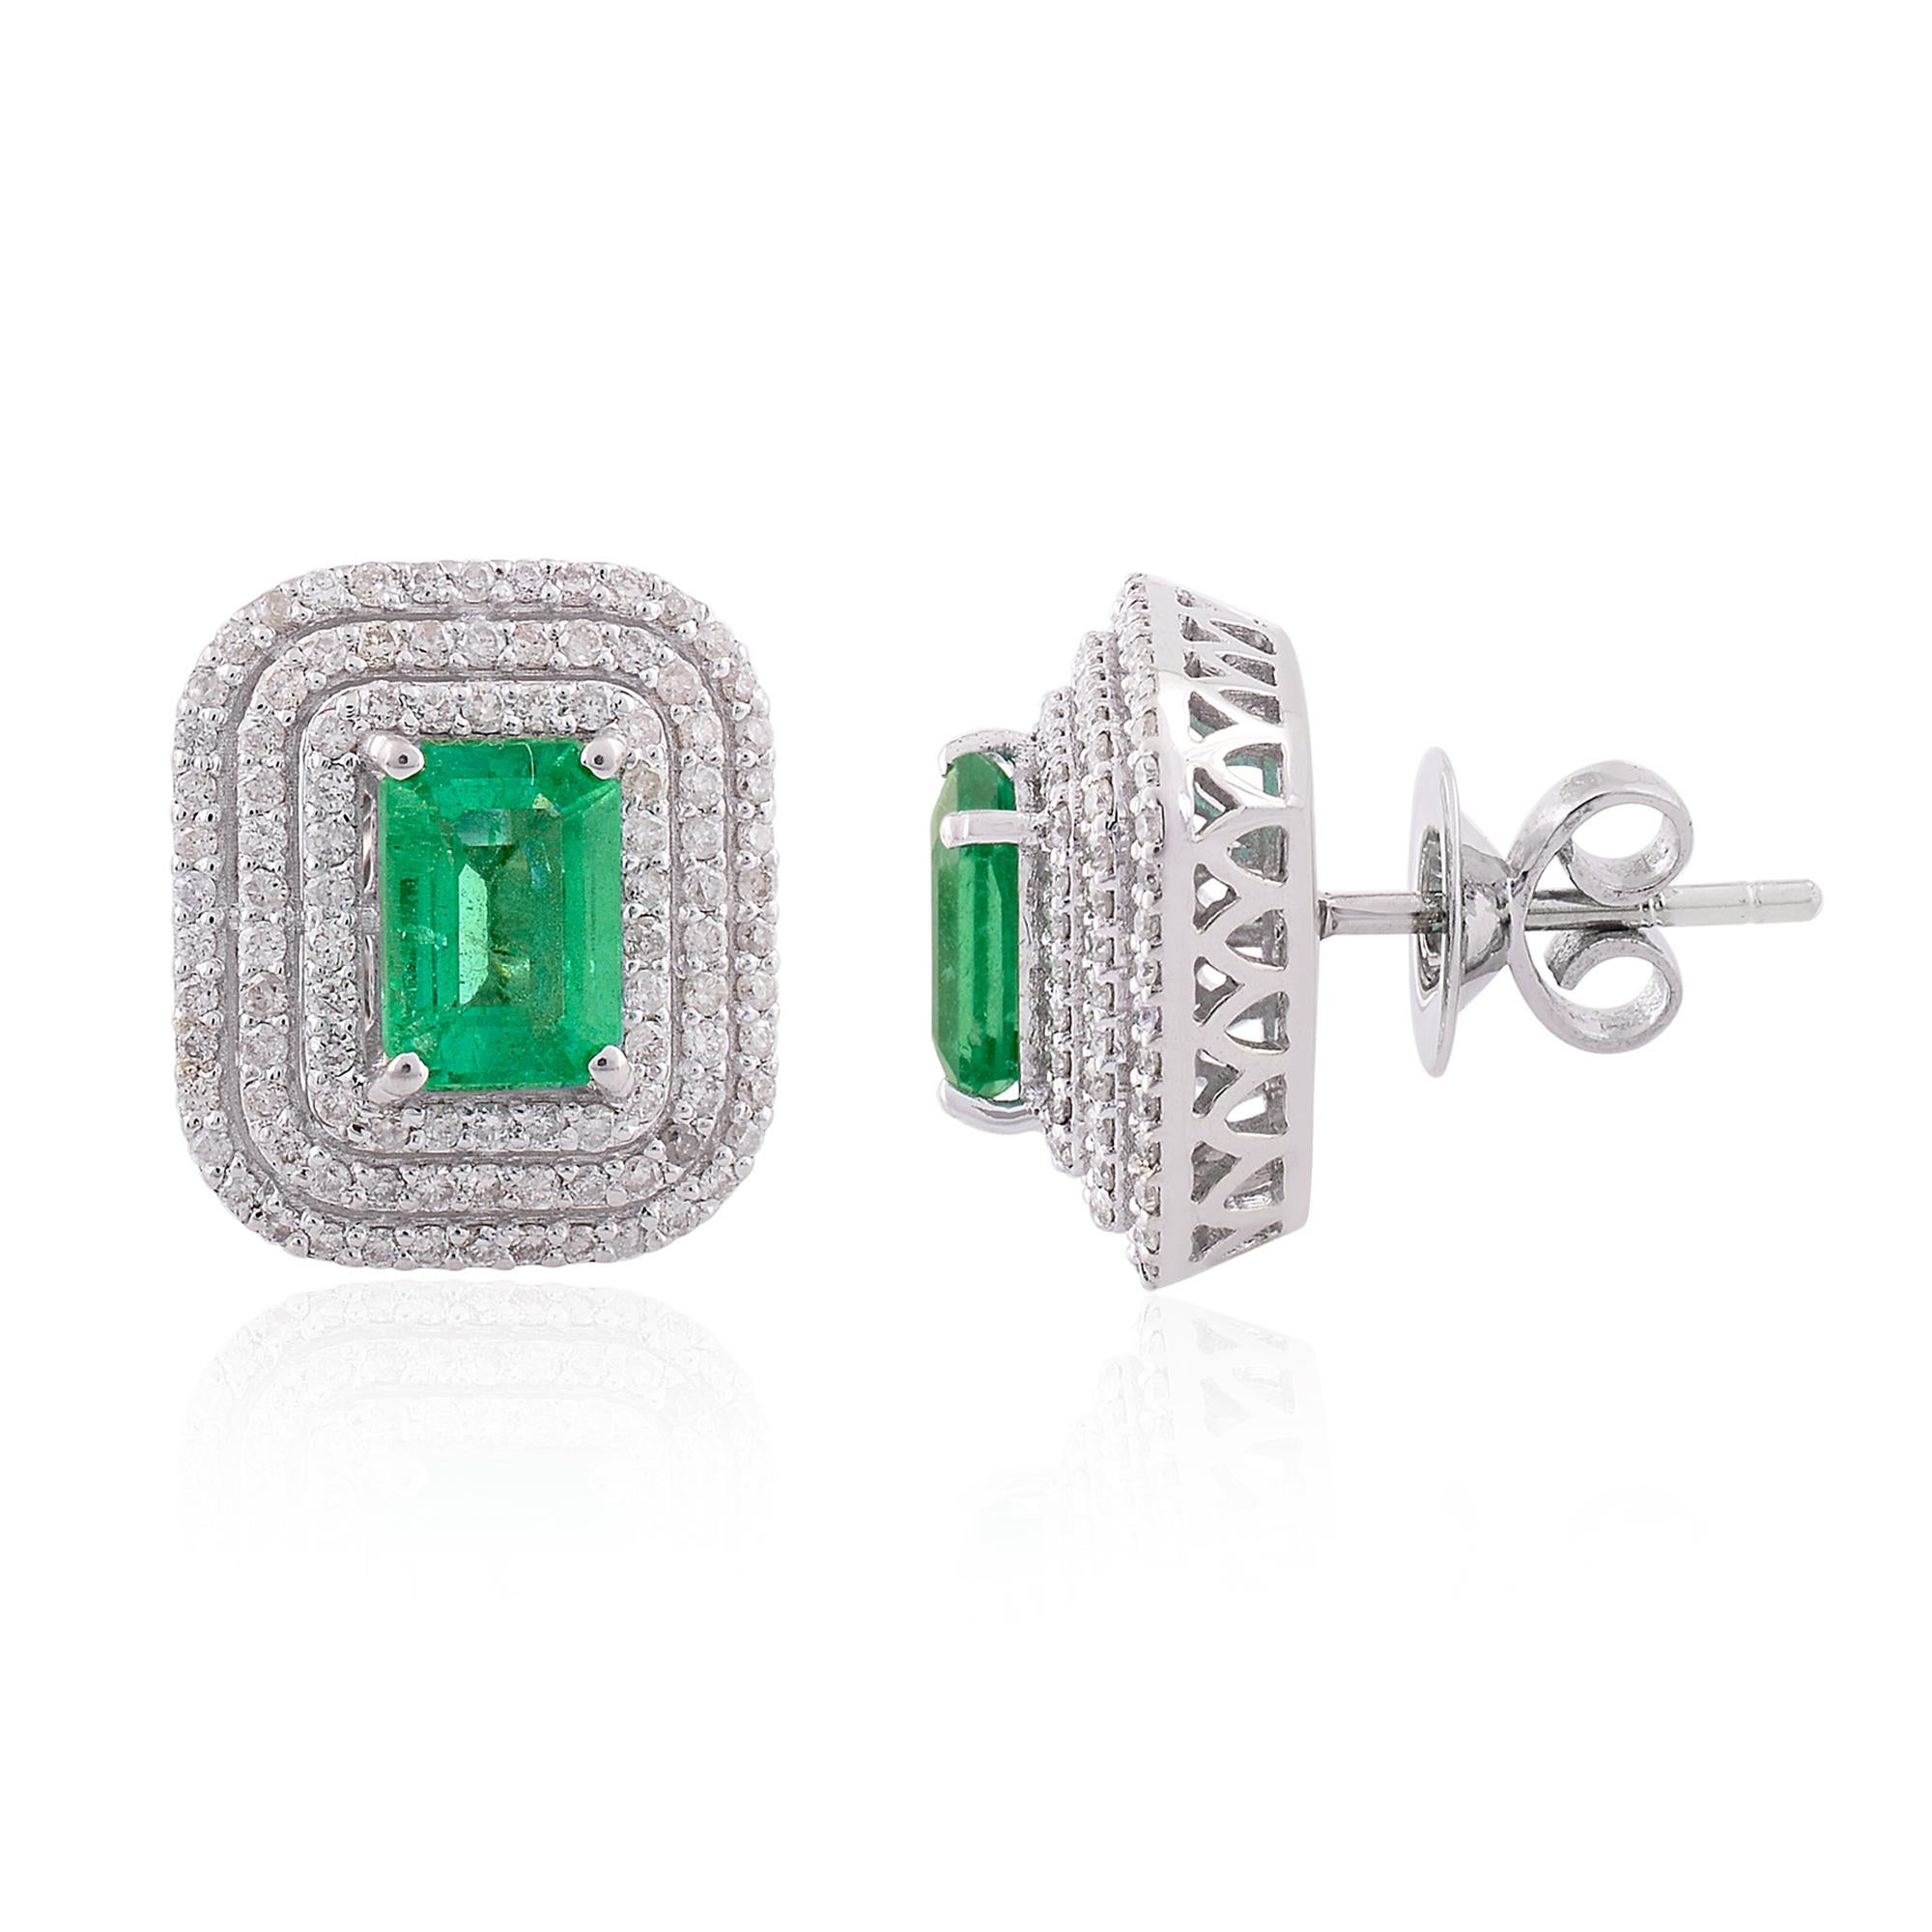 Item Code :- SEE-1416B (14k)
Gross Wt. :- 4.75 gm
14k Solid White Gold Wt. :- 4.26 gm
Natural Diamond Wt. :- 0.63 ct.  ( AVERAGE DIAMOND CLARITY SI1-SI2 & COLOR H-I )
Zambian Emerald Wt. :- 1.86 ct.
Earrings Size :- 15x12 mm approx.

✦